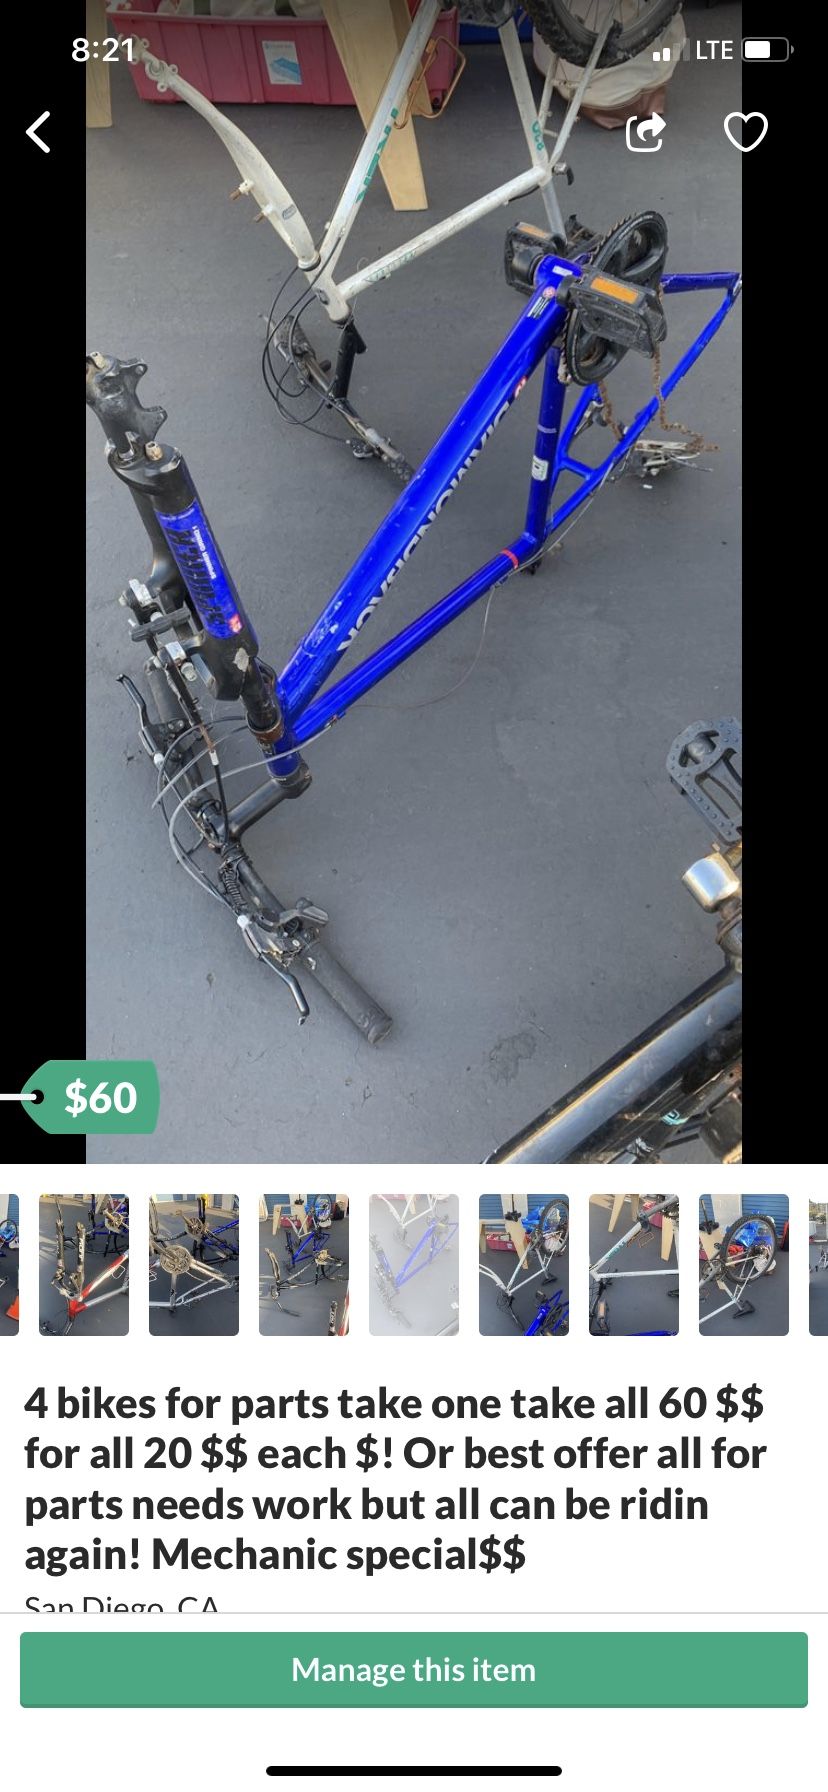 4 bikes for parts take one take all 60 $$ for all 20 $$ each $! Or best offer all for parts needs work but all can be ridin again! Mechanic special$$